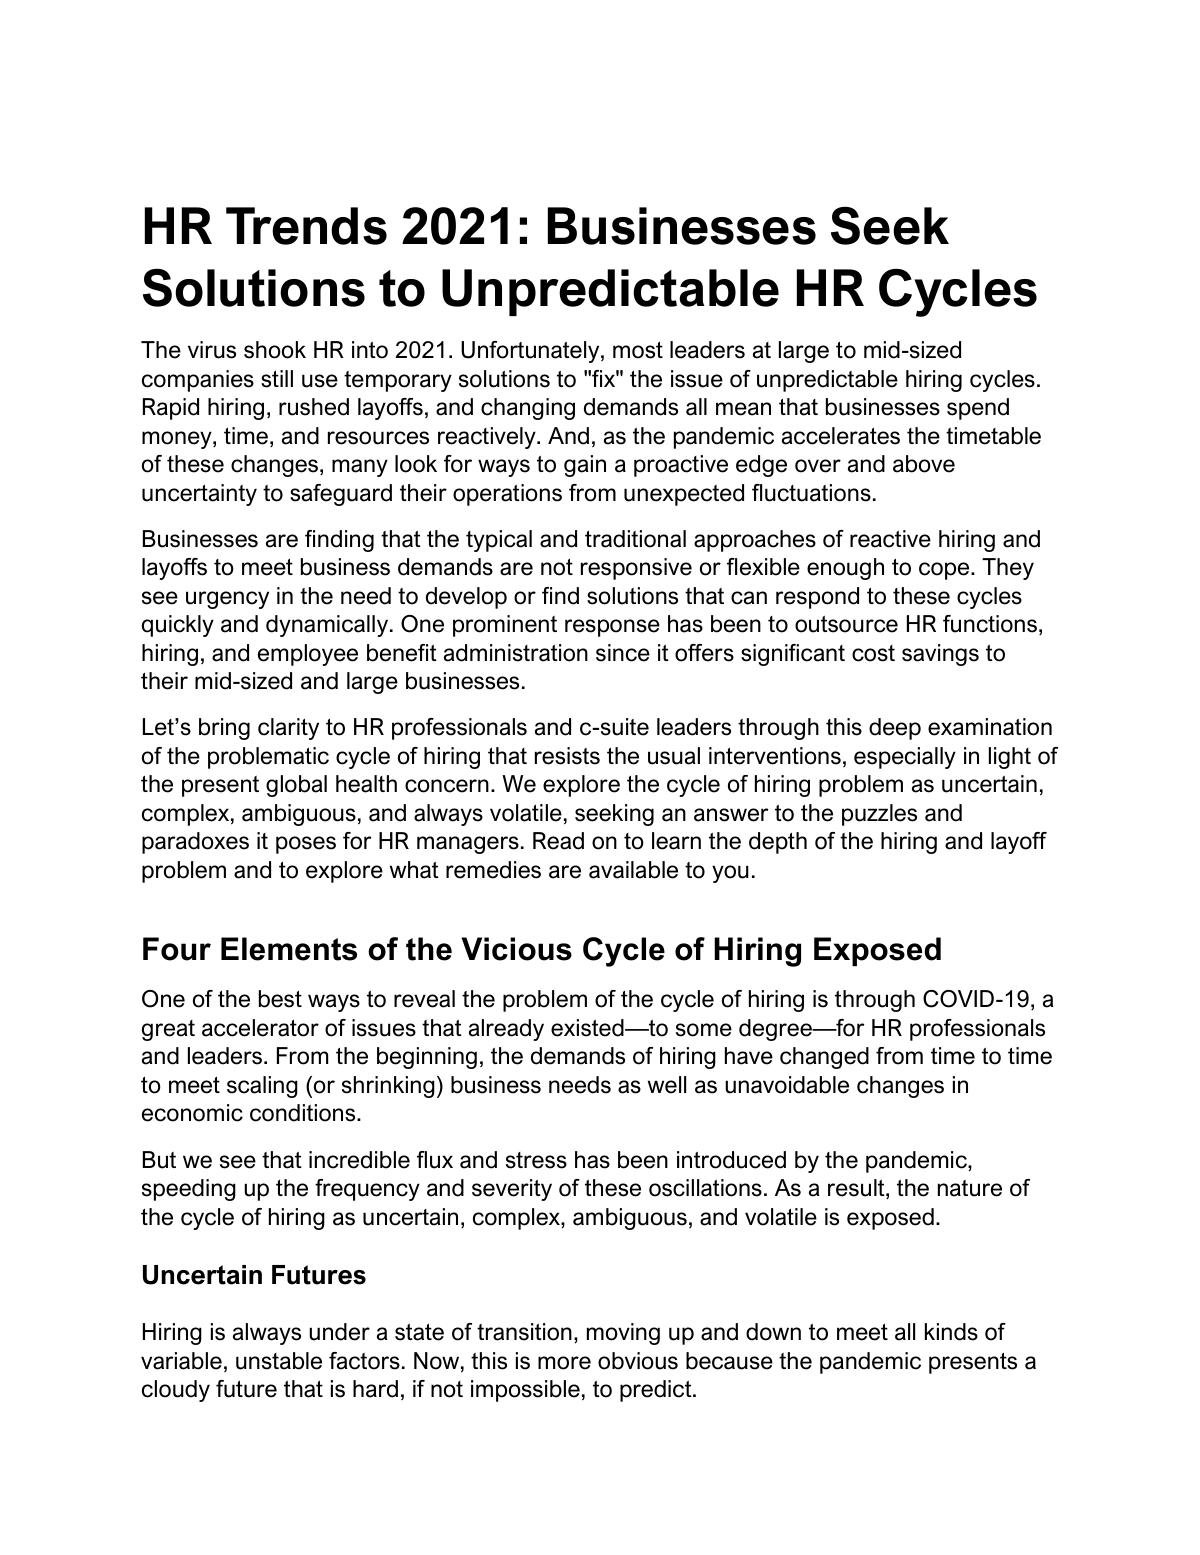 HR Trends 2021: Businesses Seek Solutions to Unpredictable HR Cycles